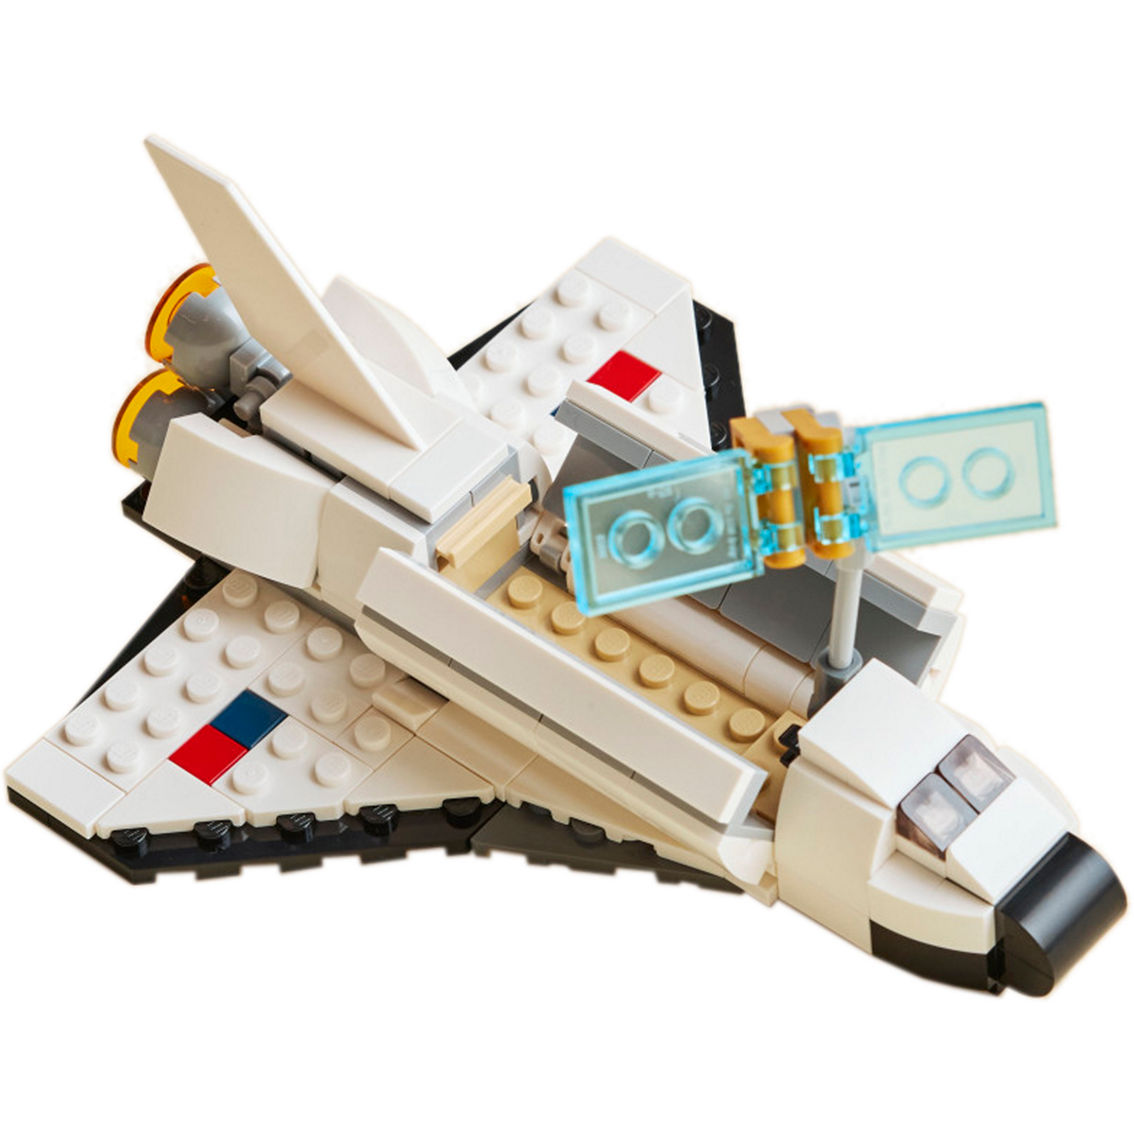 LEGO Creator 3 in 1 Space Shuttle 31134 - Image 6 of 6